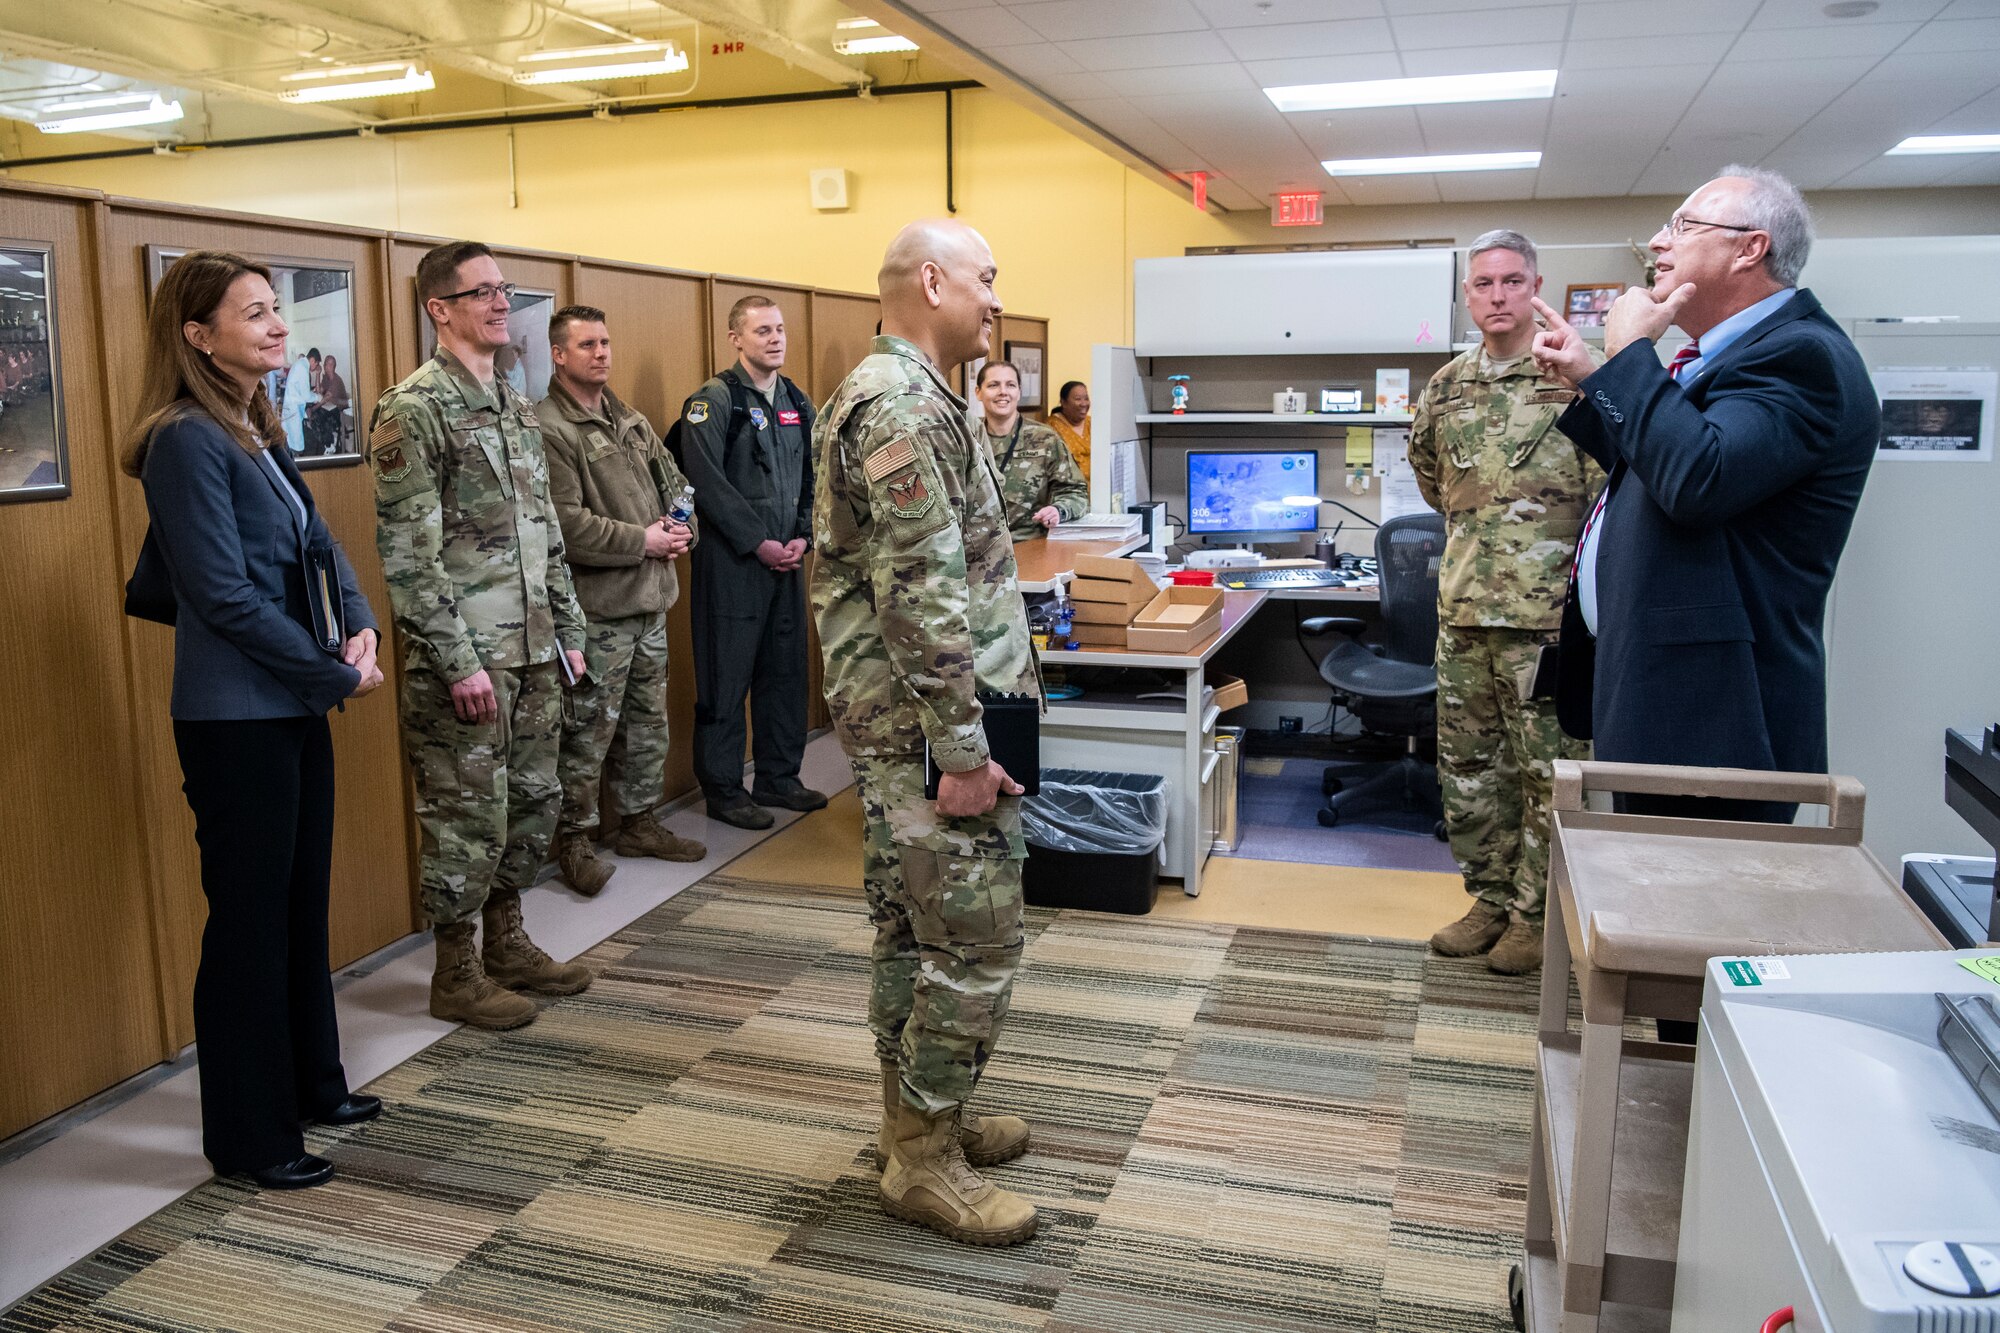 Mark Vojtecky, Armed Forces Medical Examiner System (AFMES) chief of staff, briefs distinguished visitors Jan. 24, 2020, at Dover Air Force Base, Del. Brig. Gen. Jimmy Canlas, 618th Air Operations Center commander and his team, visited AFMES to learn more about their forensic investigative services, including forensic pathology, DNA forensics, forensic toxicology and medical mortality surveillance. (U.S. Air Force photo by Senior Airman Christopher Quail)